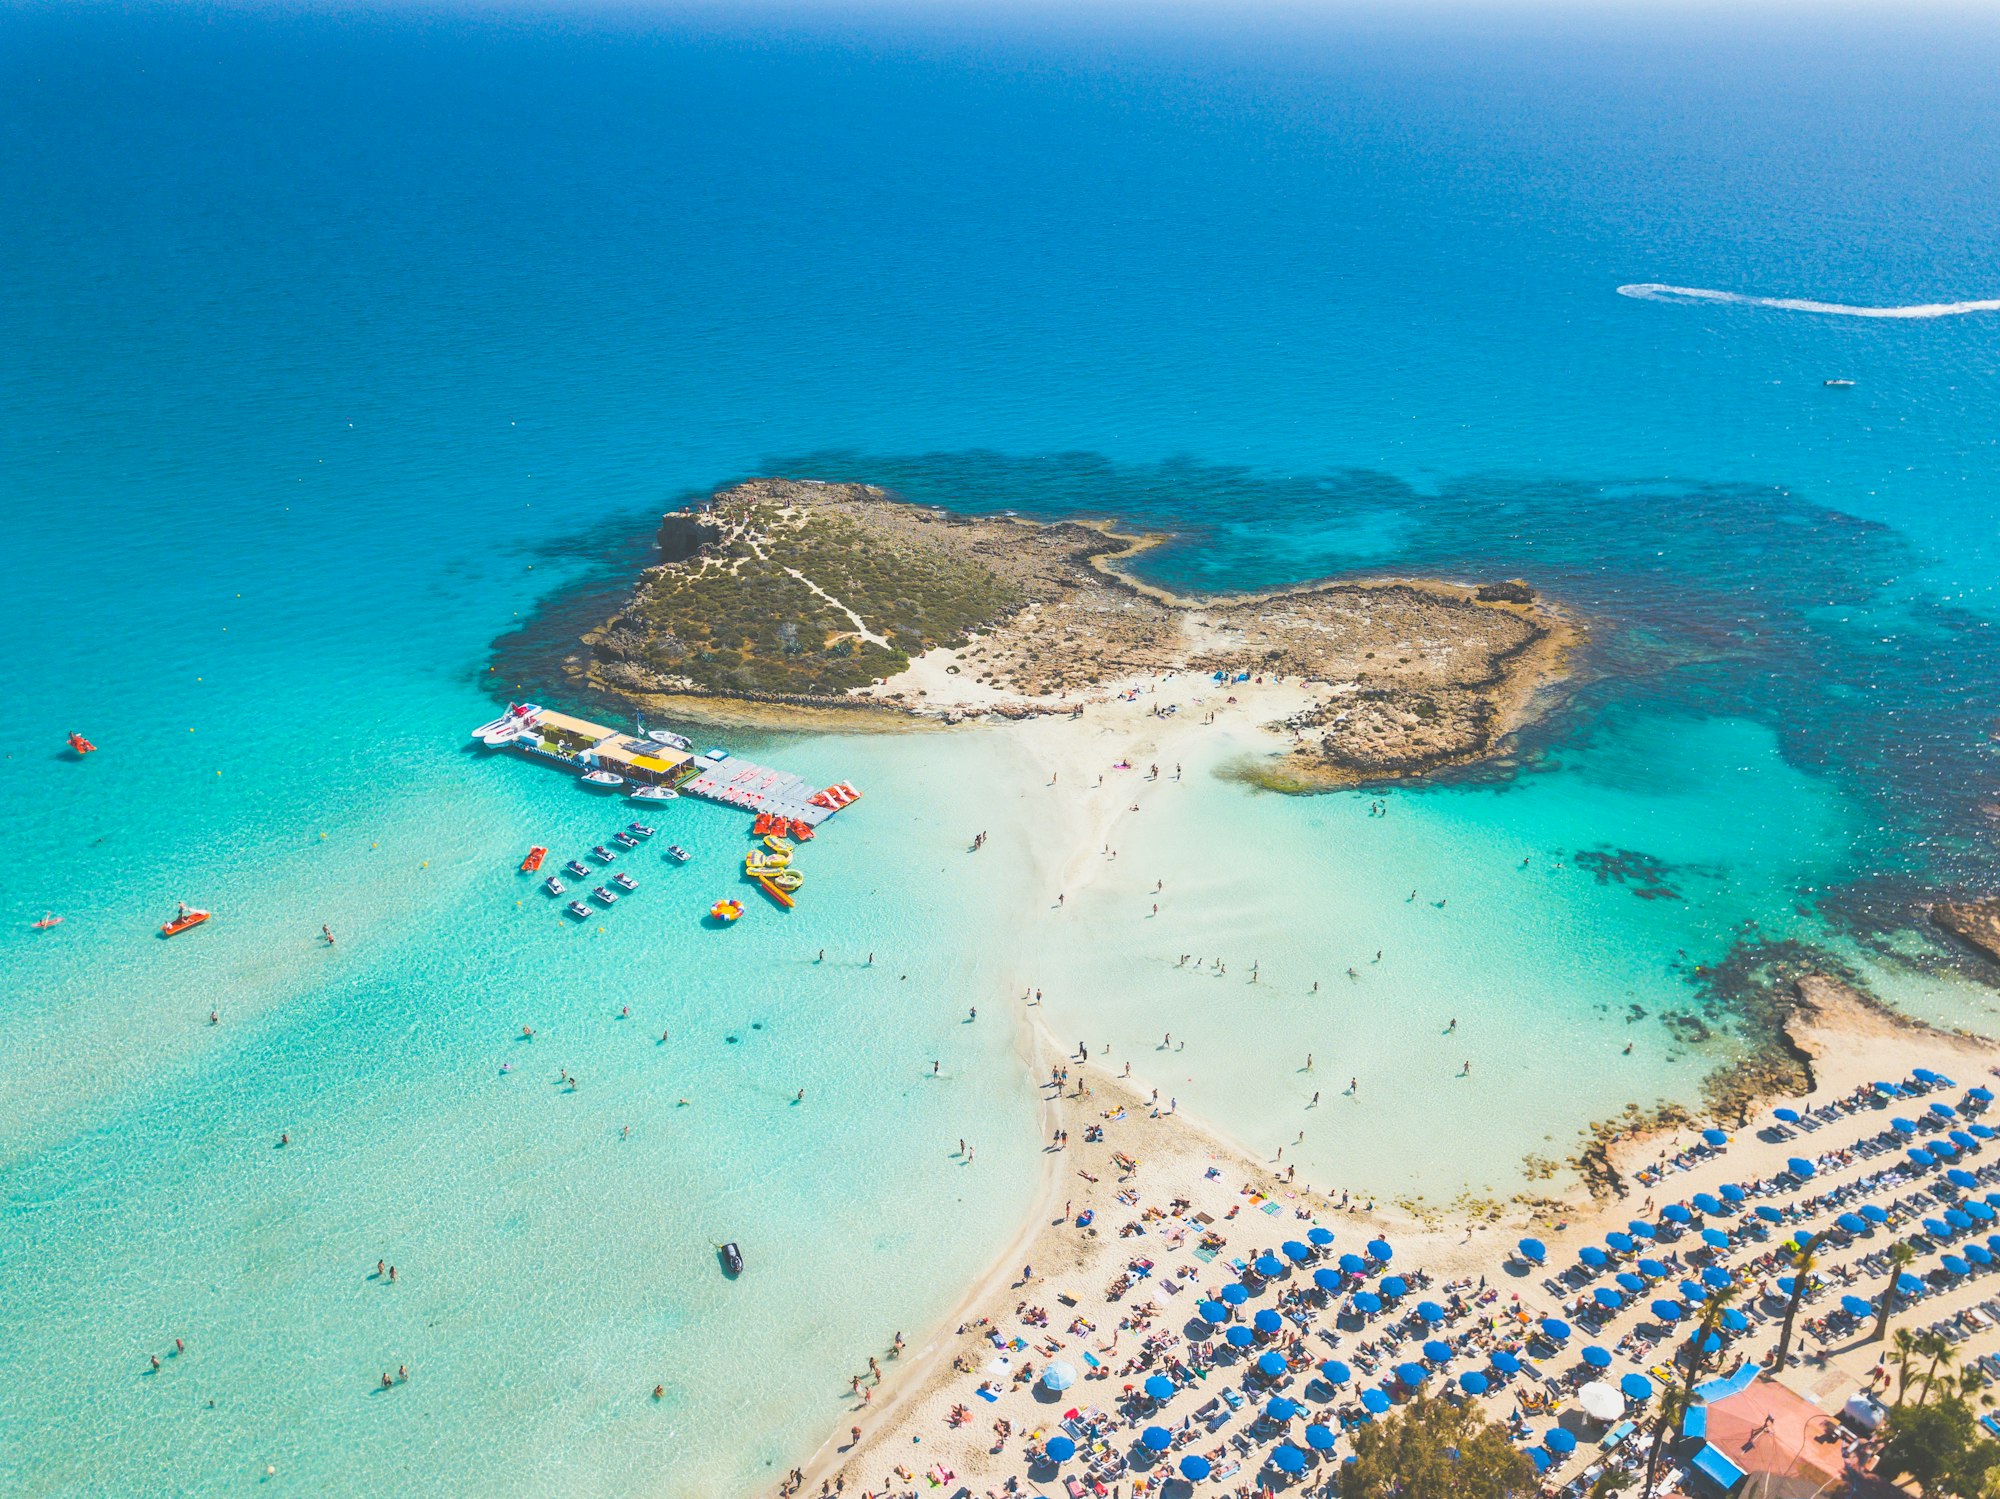 aerial view of packed beach with umbrellas and small island and reef connected by a sandbar